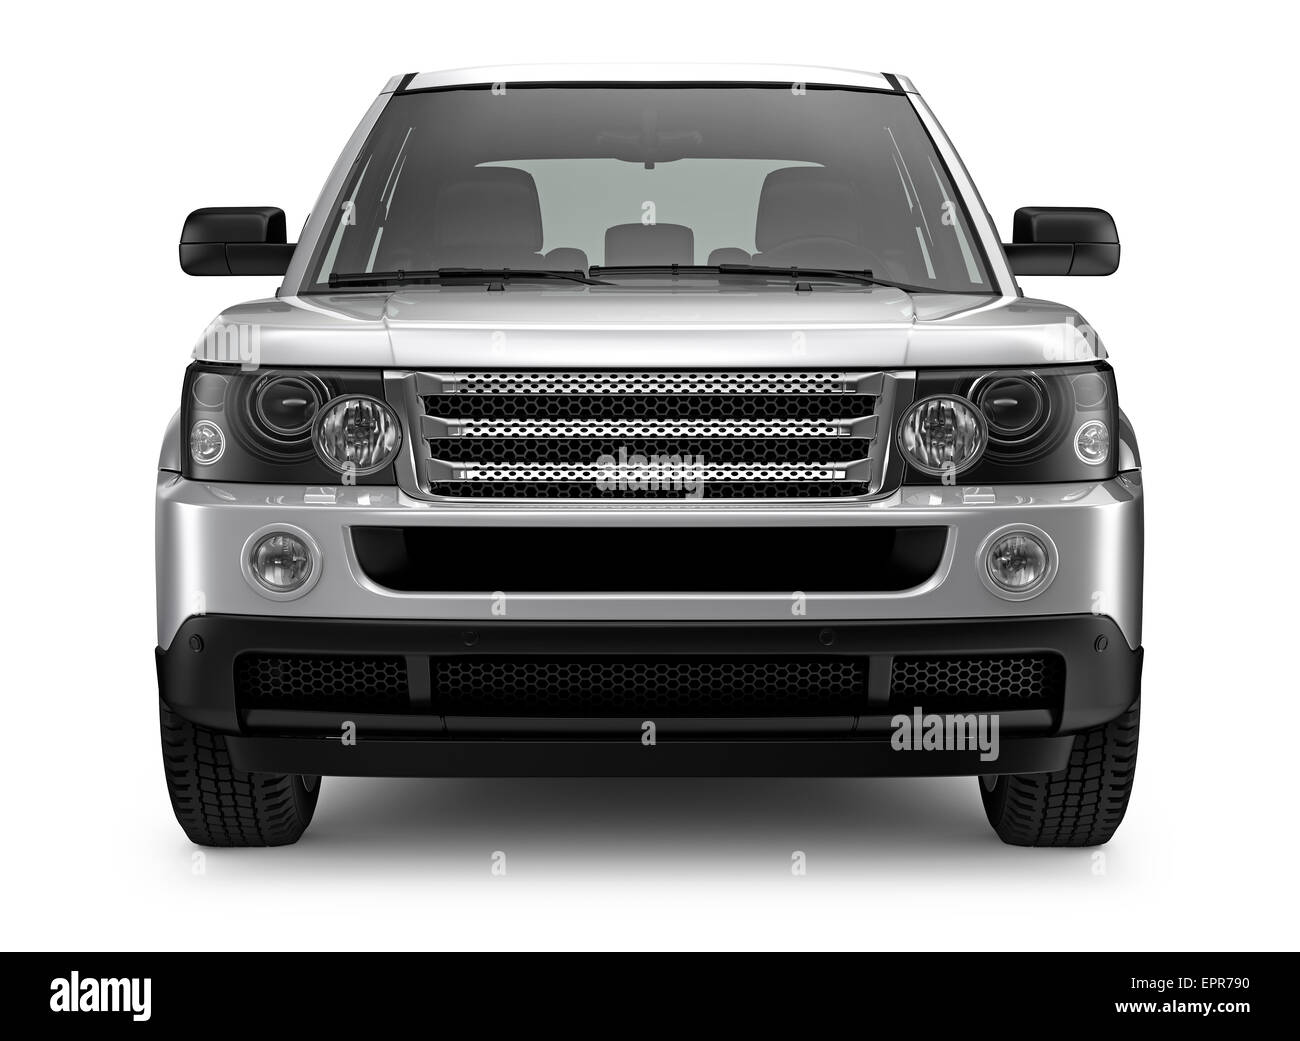 Silver Heavy SUV - front view Stock Photo